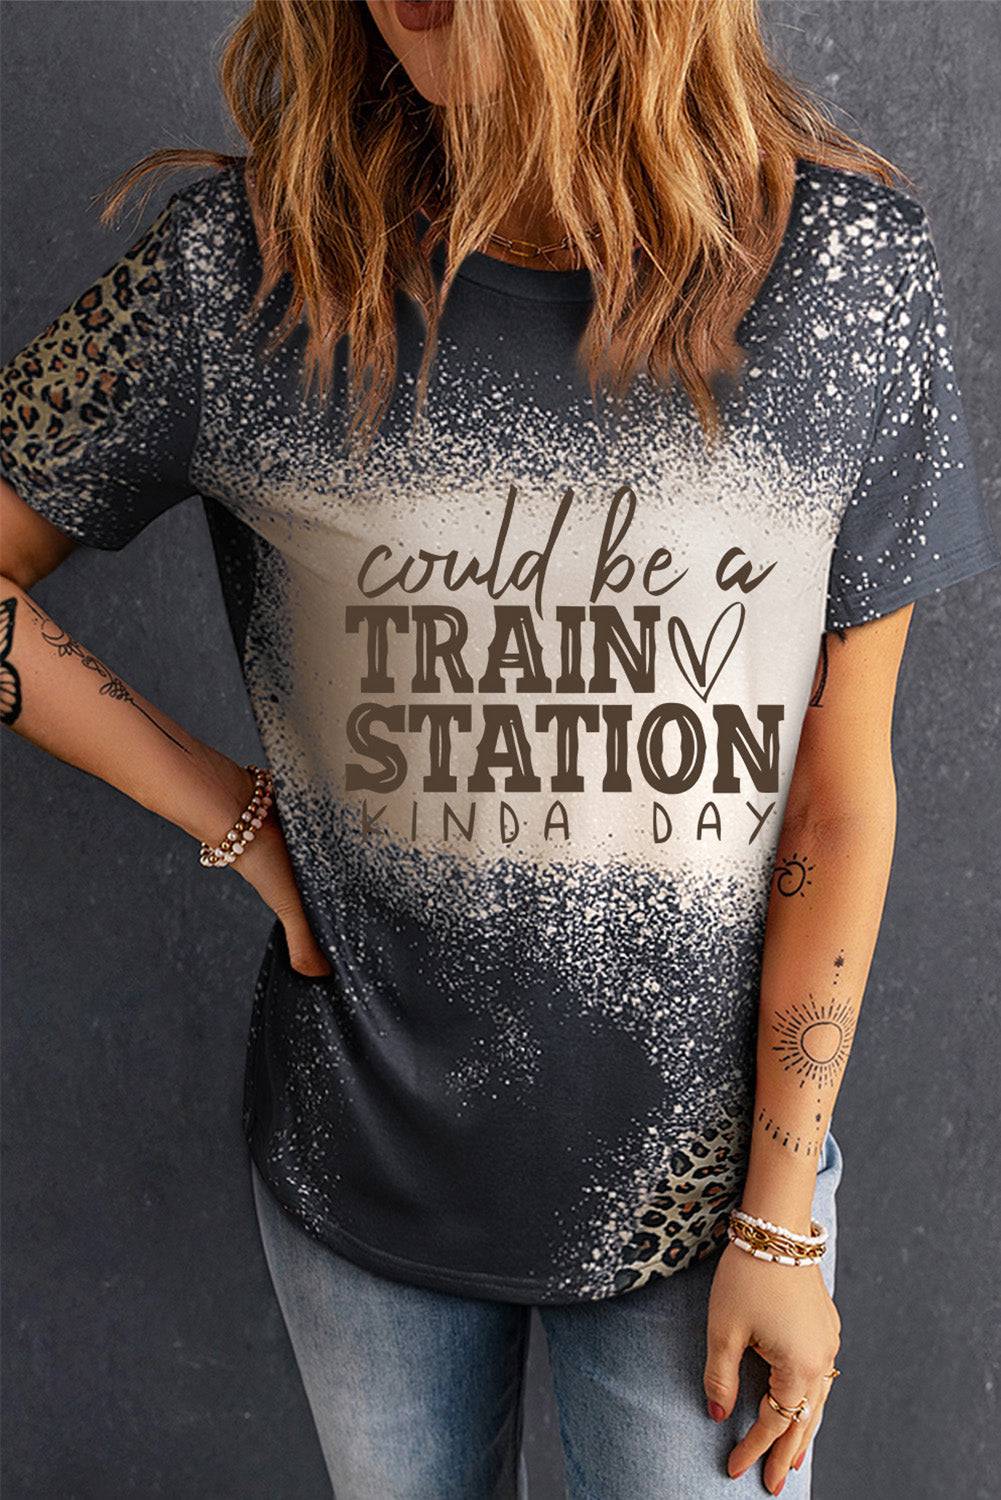 "Leopard's Romance - Ignite Your Passion for Fashion with Our Wildly Elegant Tee Shirt" - Guy Christopher